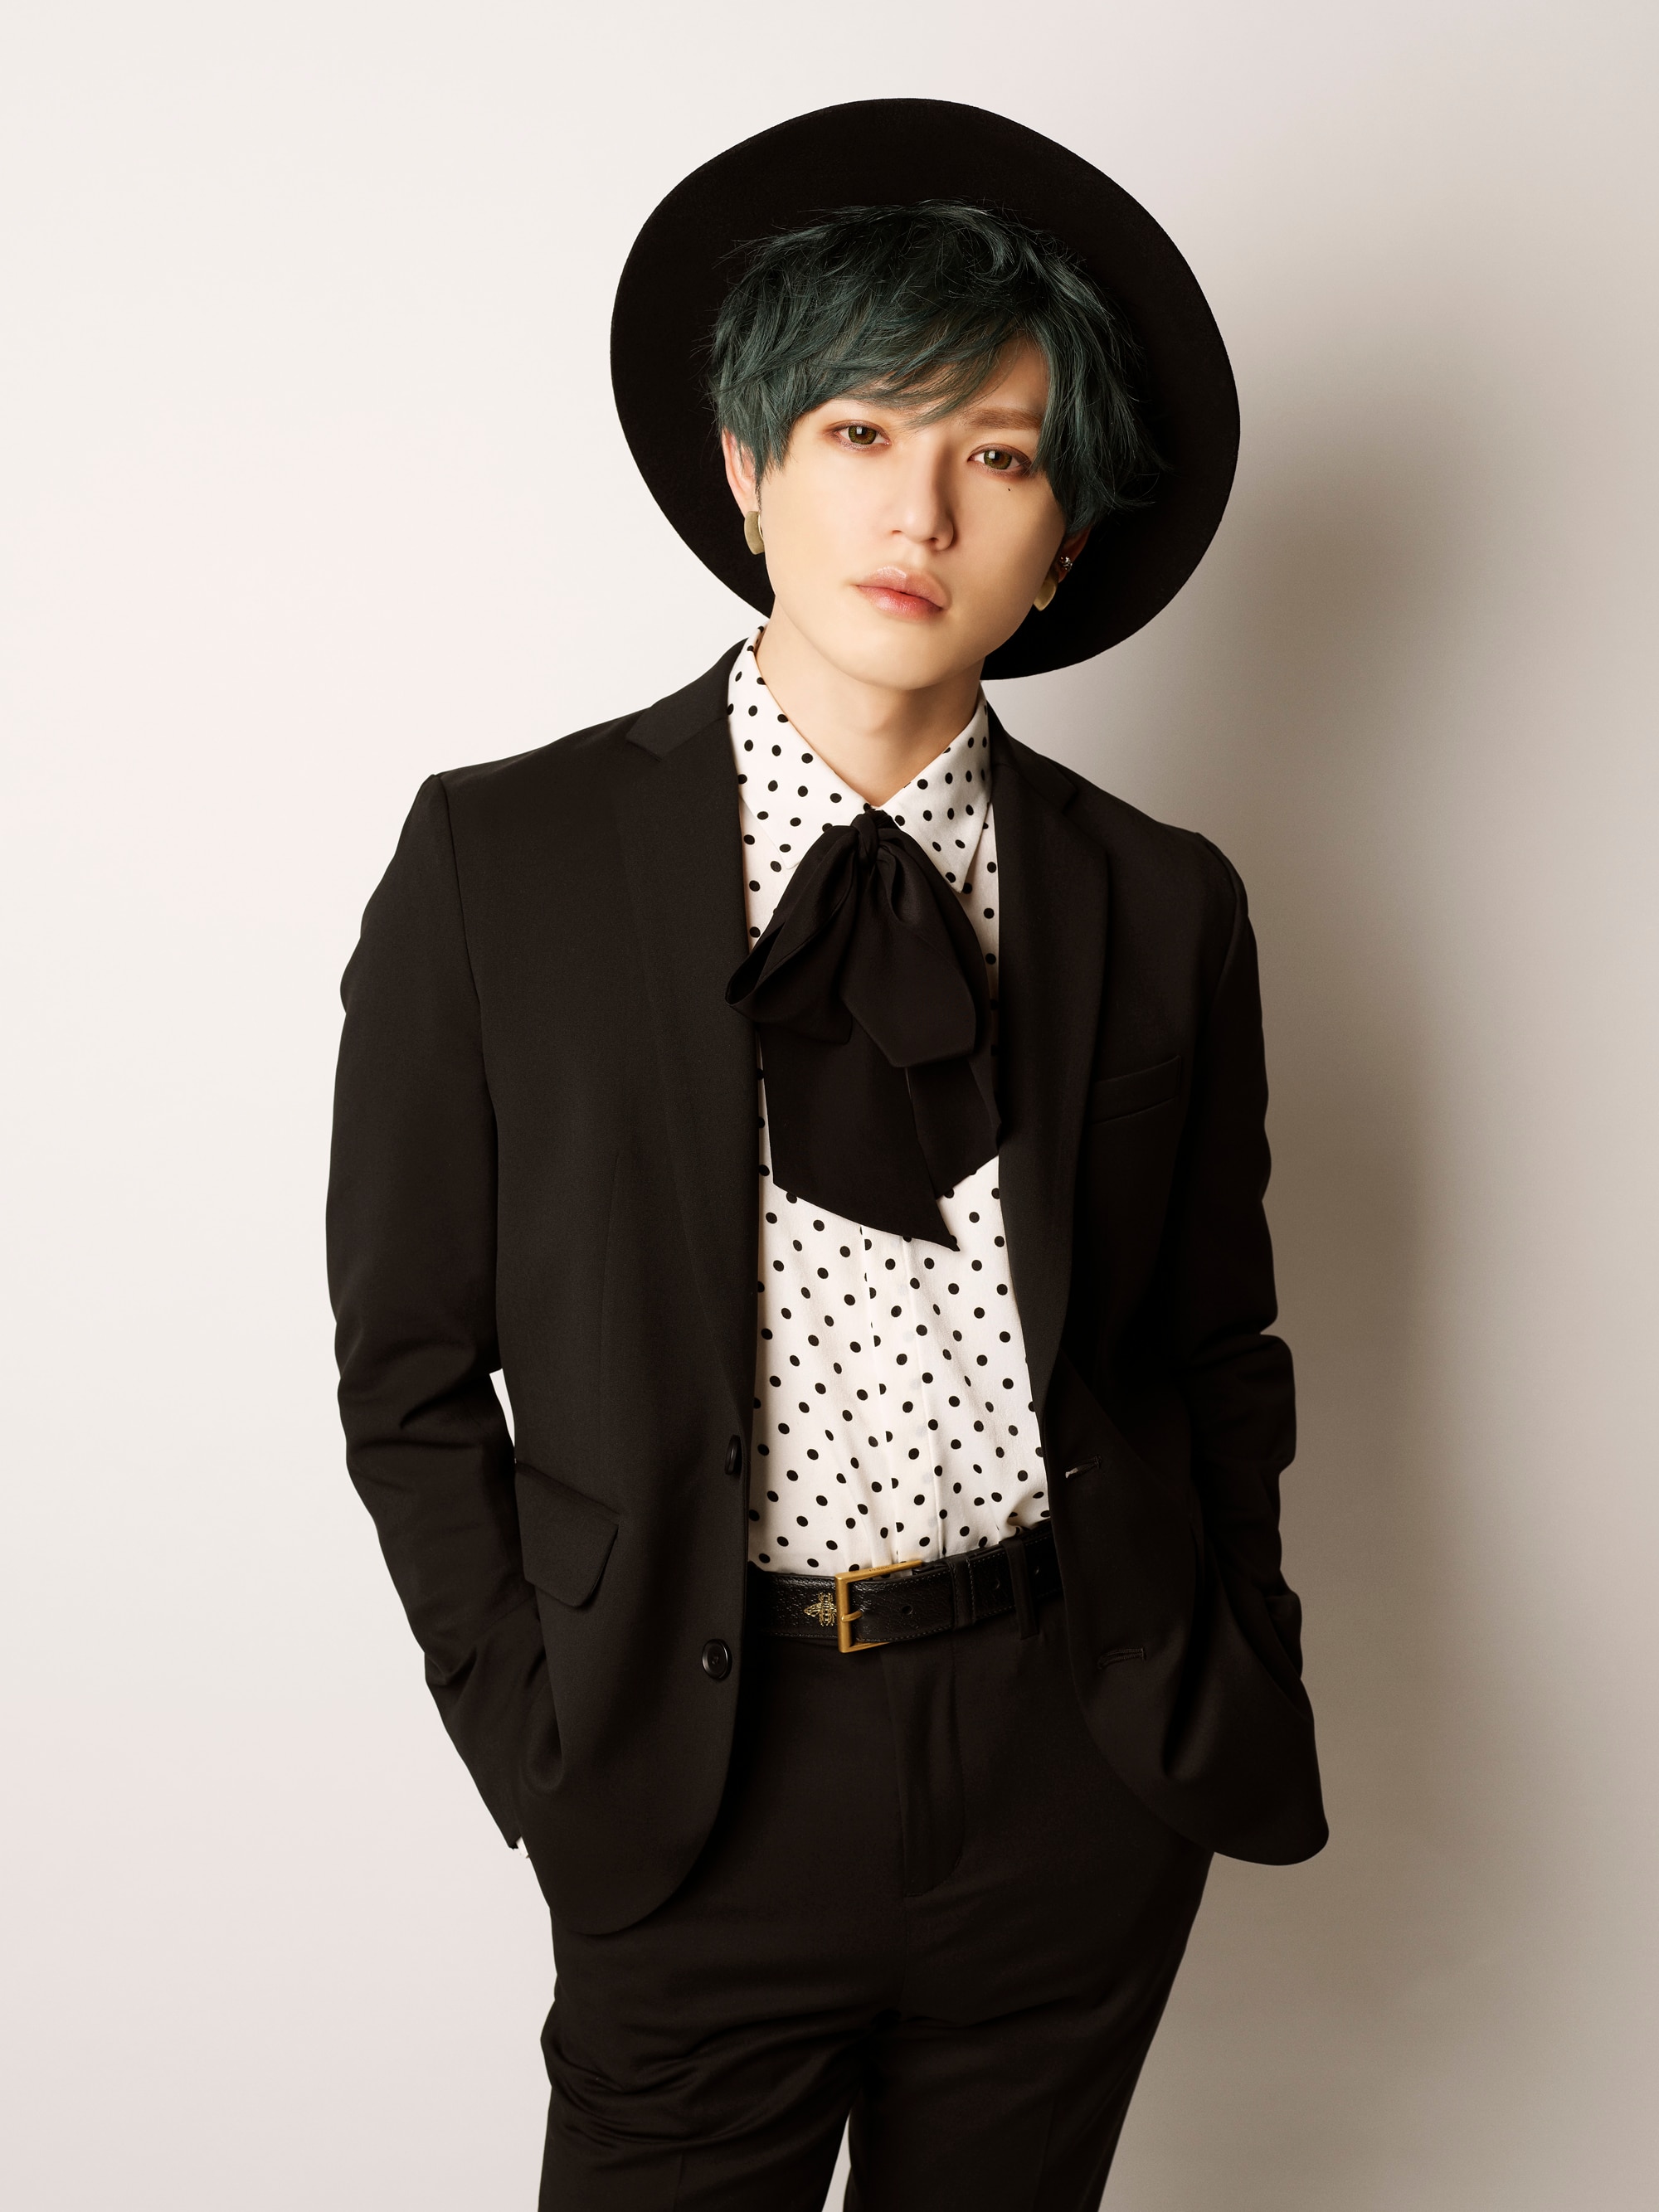 Profile Aaa トリプル エー Official Website